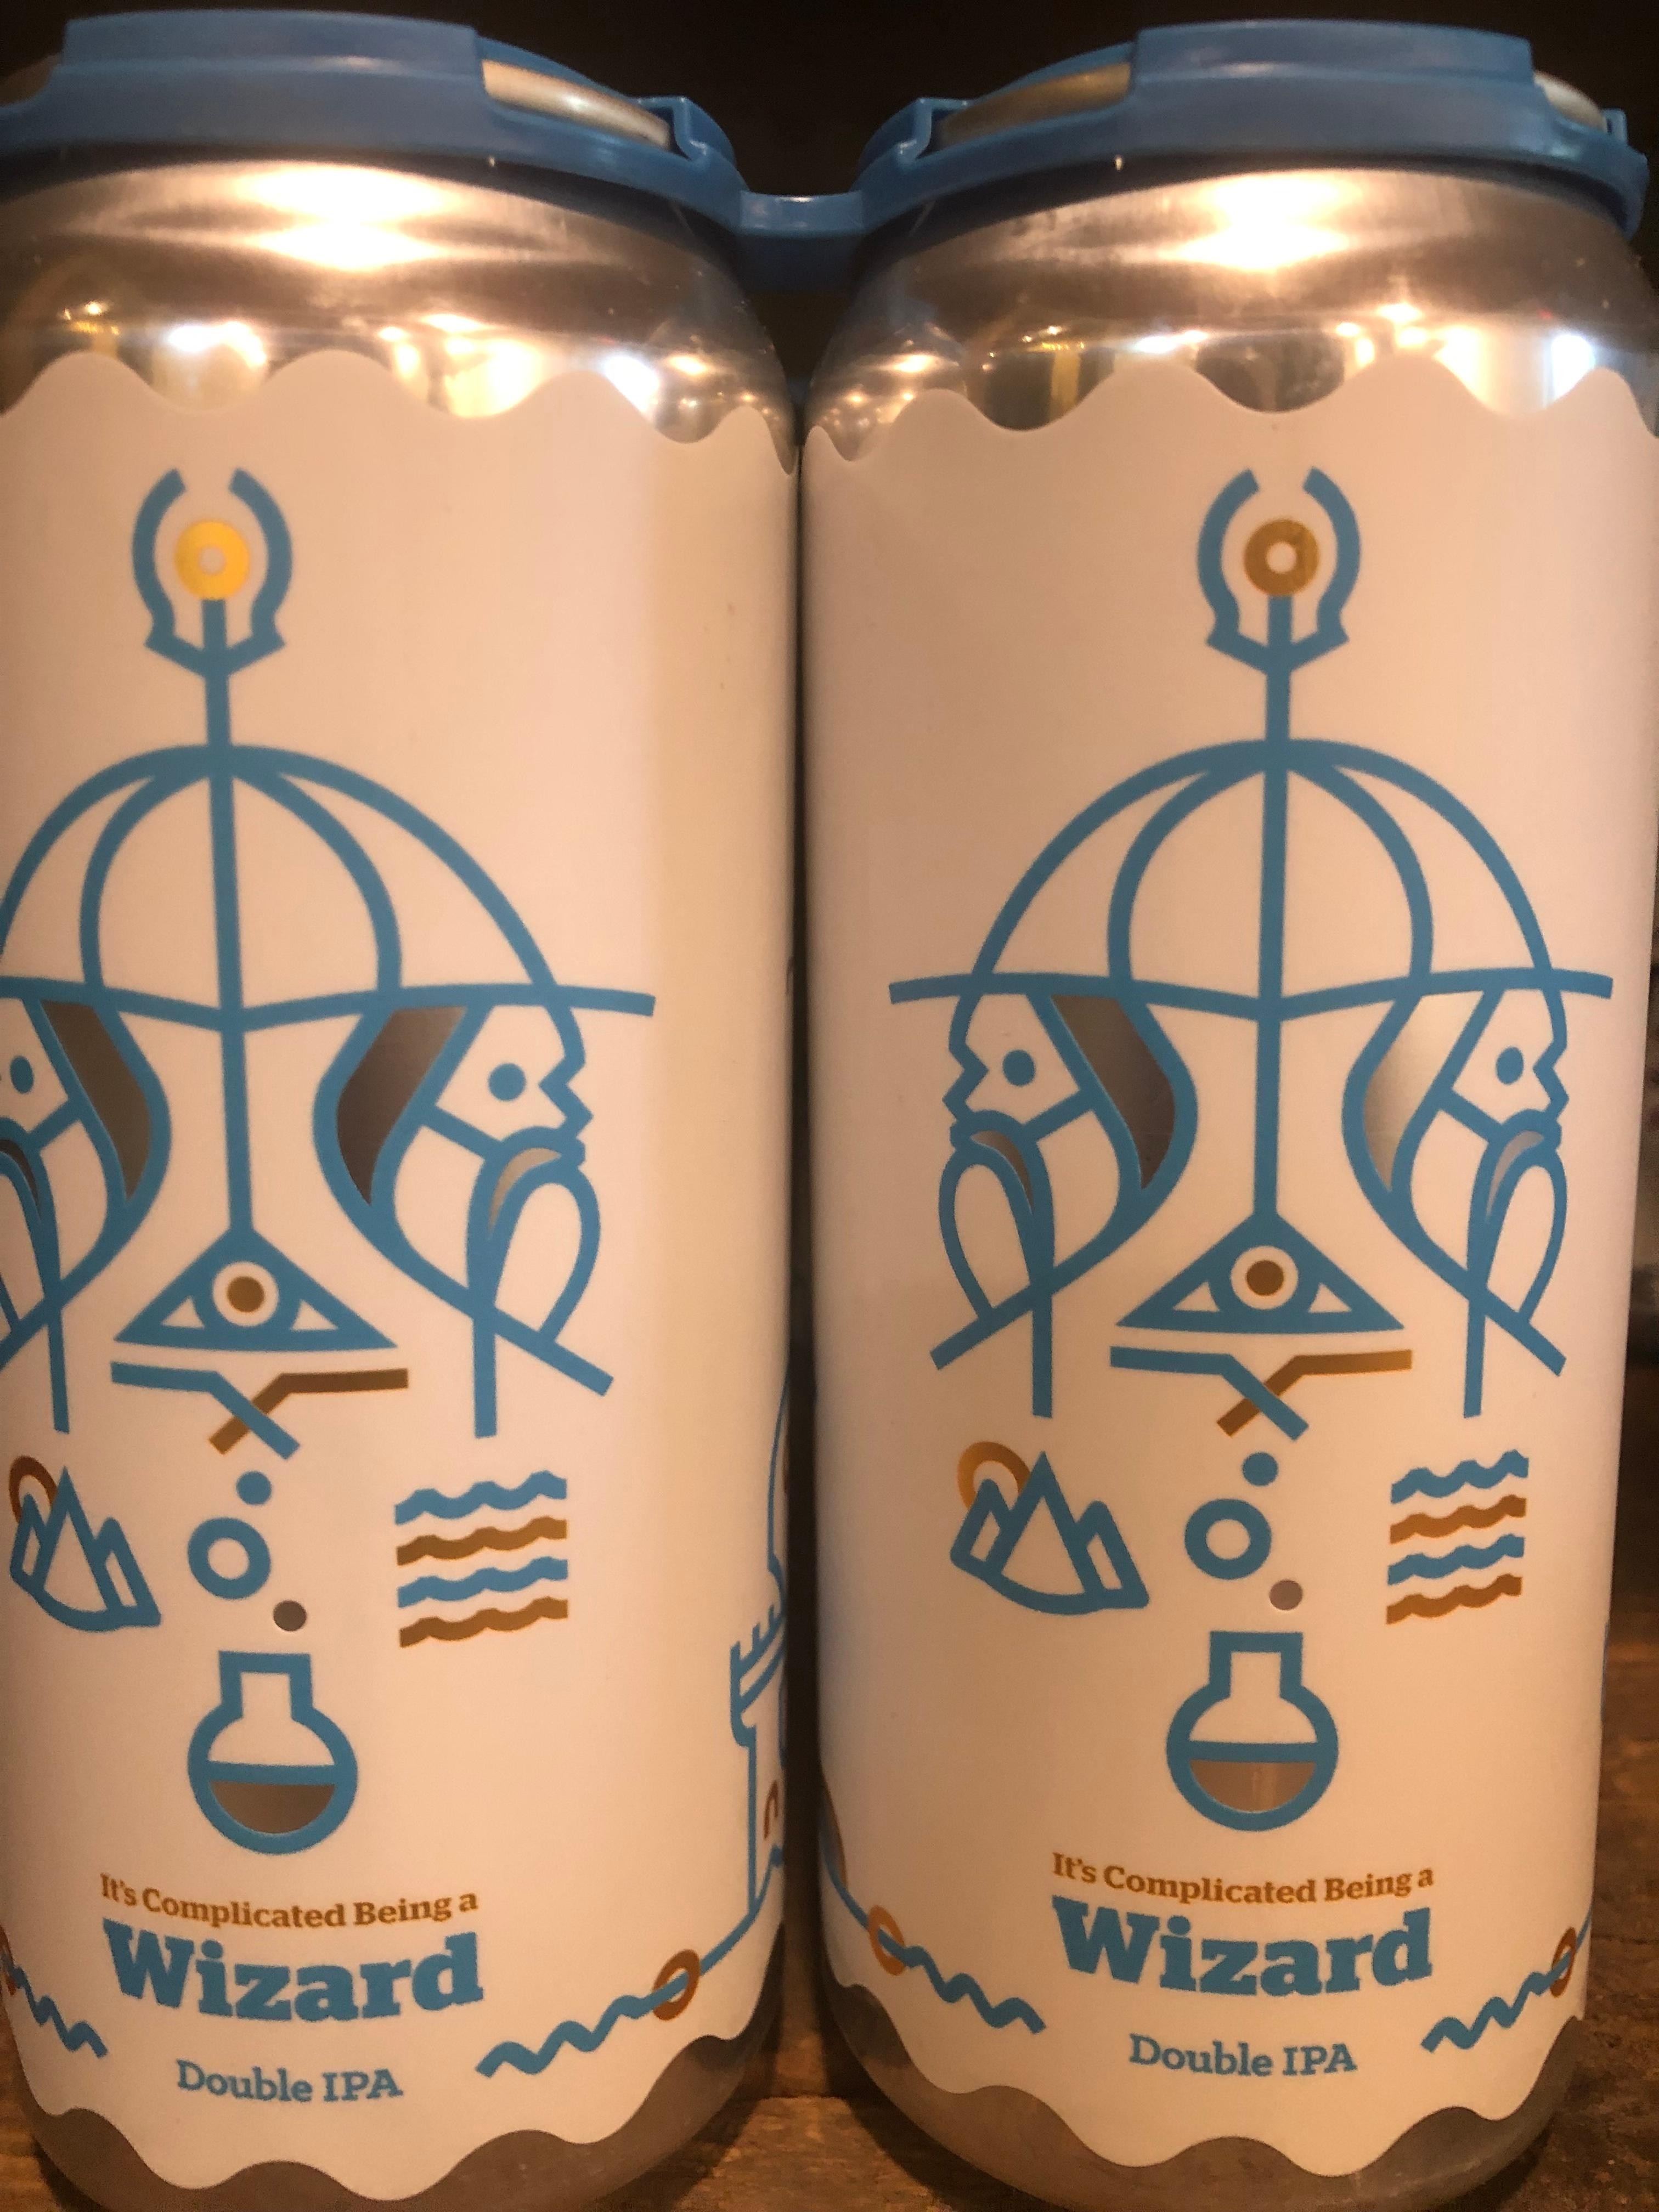 Burlington Beer Co. It's Complicated Being a Wizard